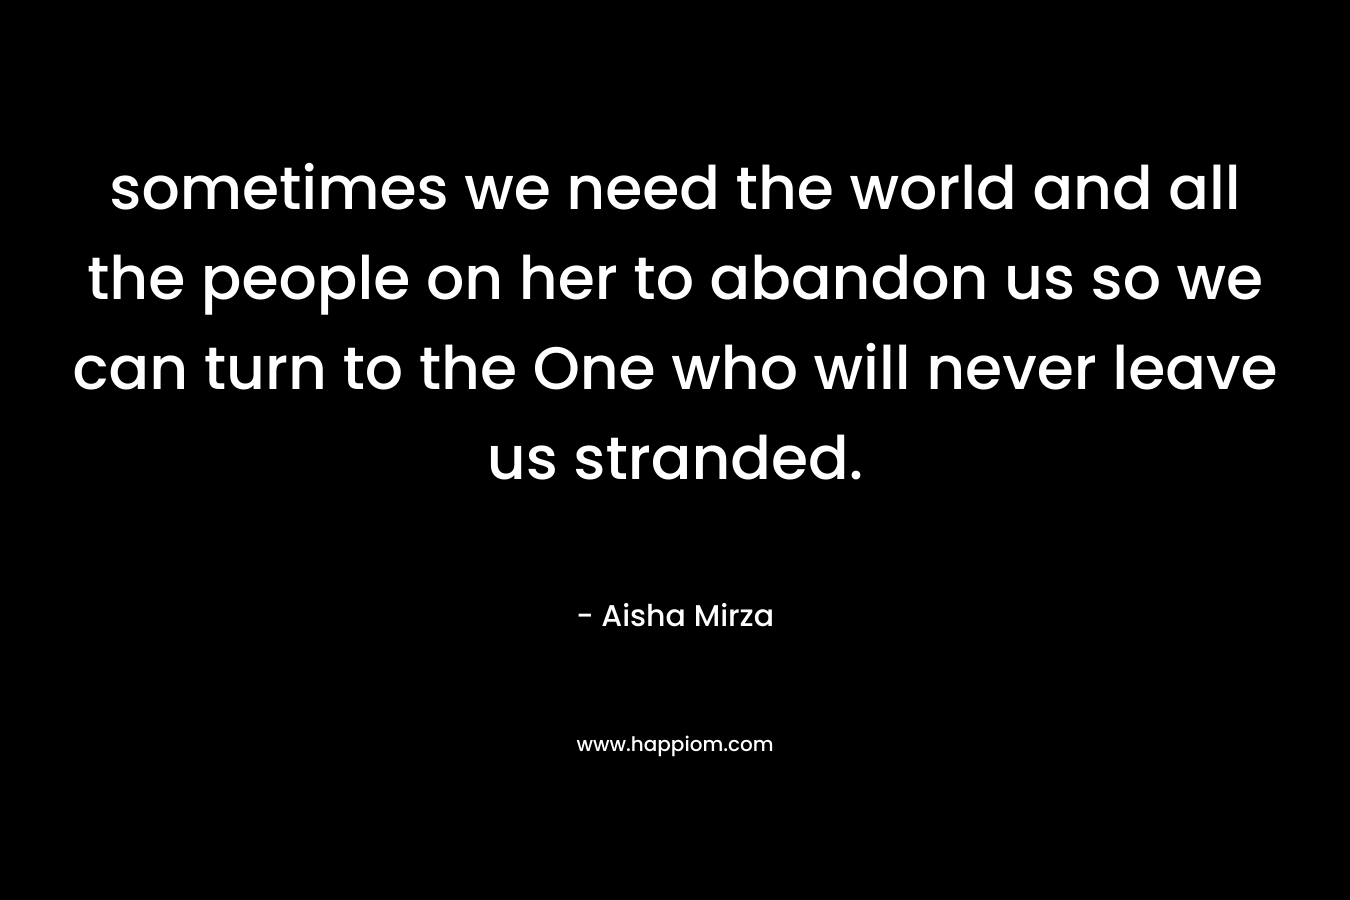 sometimes we need the world and all the people on her to abandon us so we can turn to the One who will never leave us stranded. – Aisha Mirza